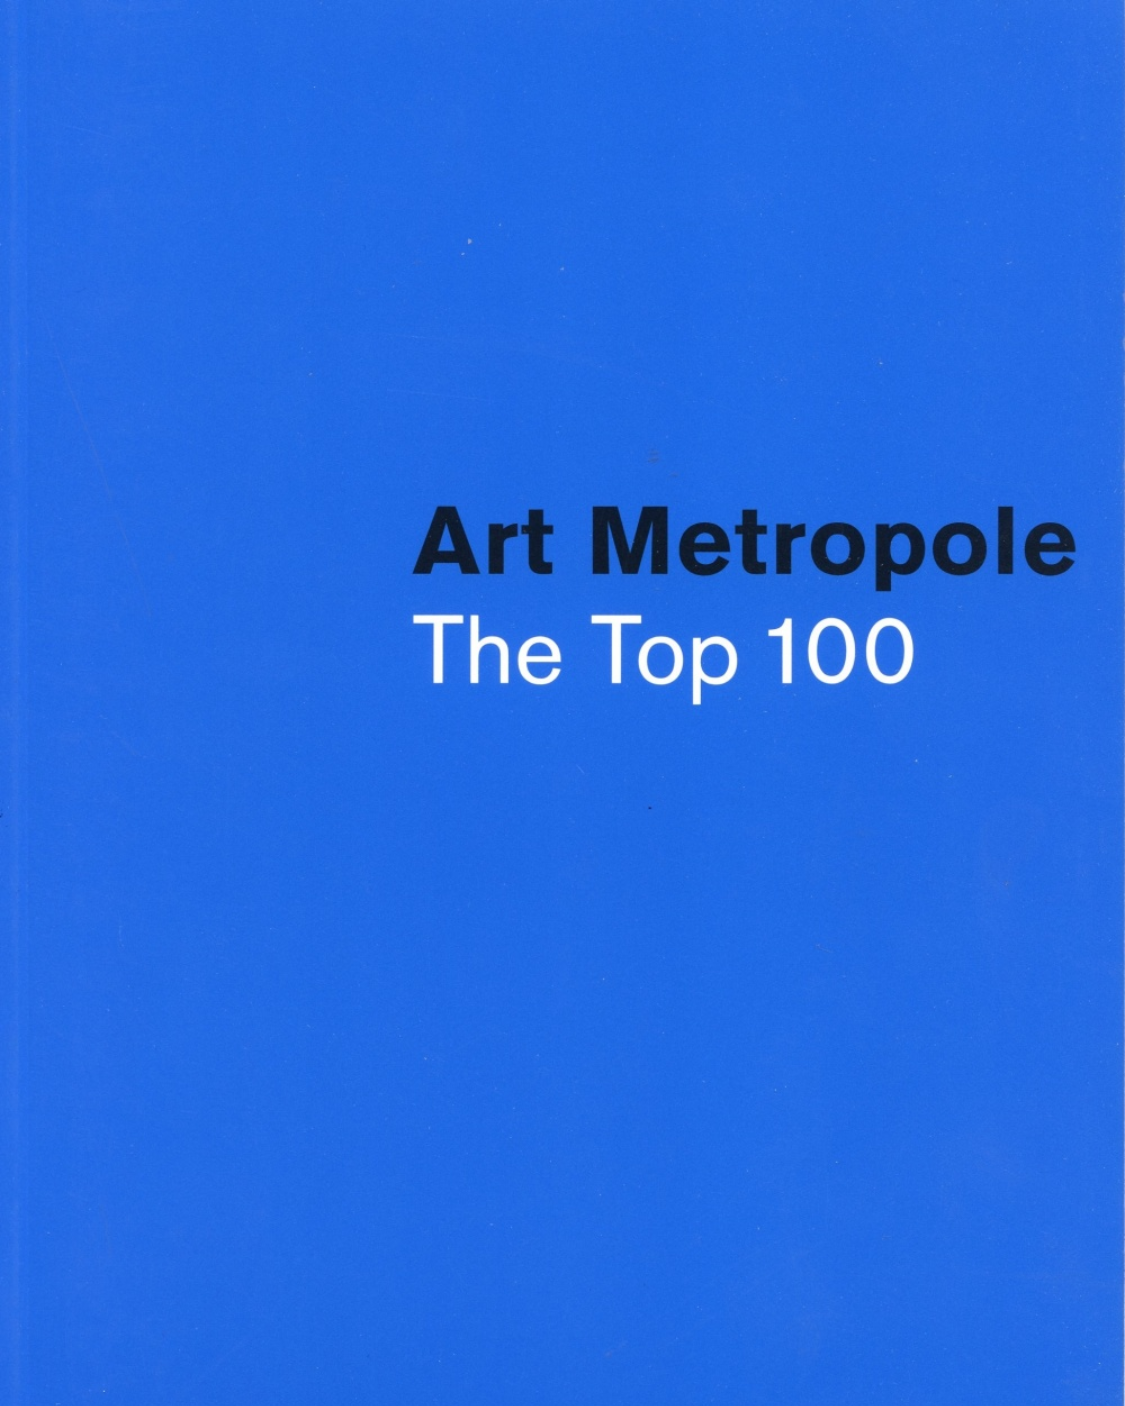 Art Metropole: The Top 100 by the National Gallery of Canada